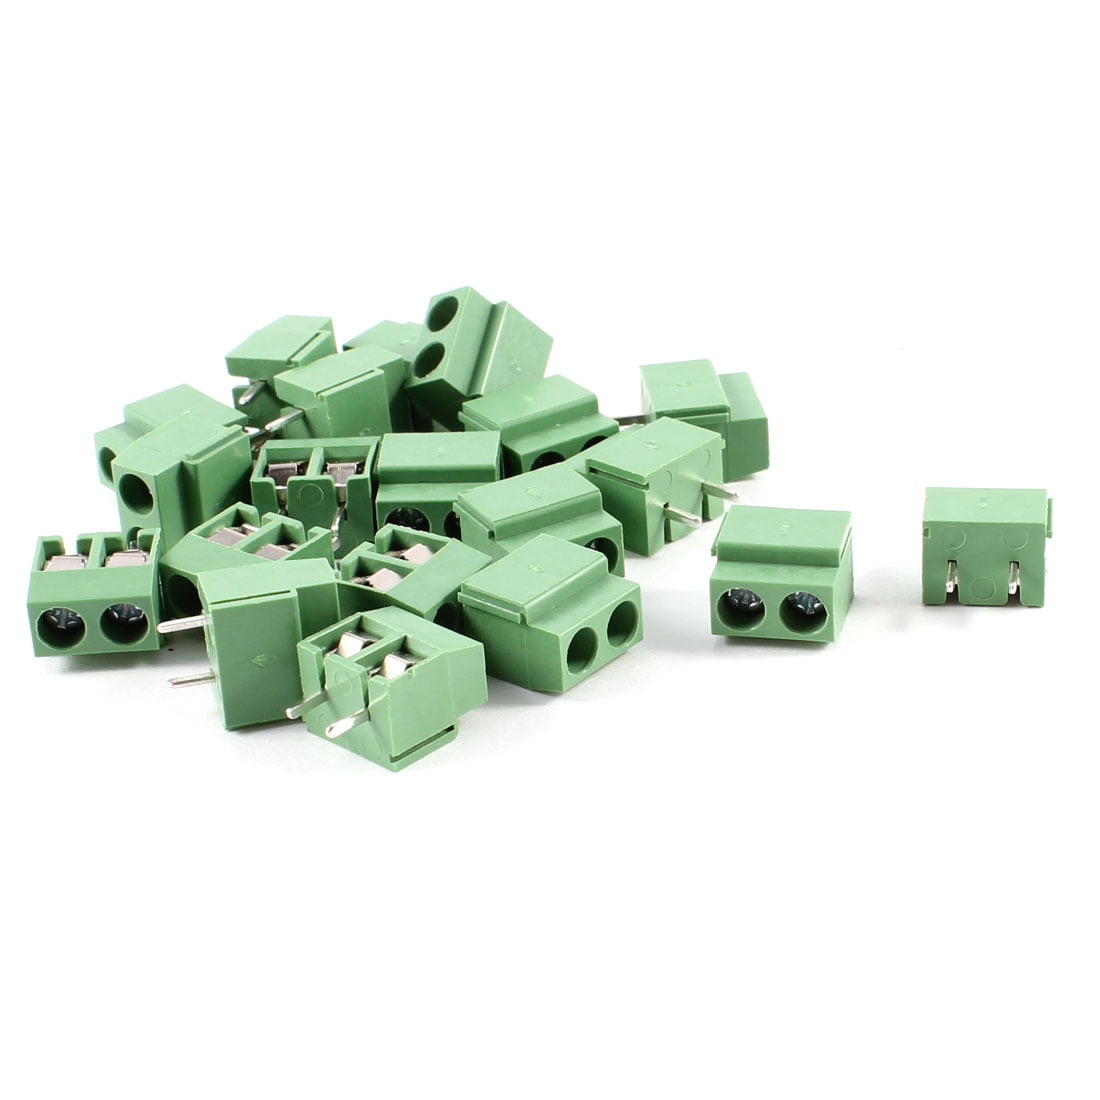 2P 5mm Pitch PCB Mounting Screw Terminal Block Connector AC 300V 10A 14pcs 